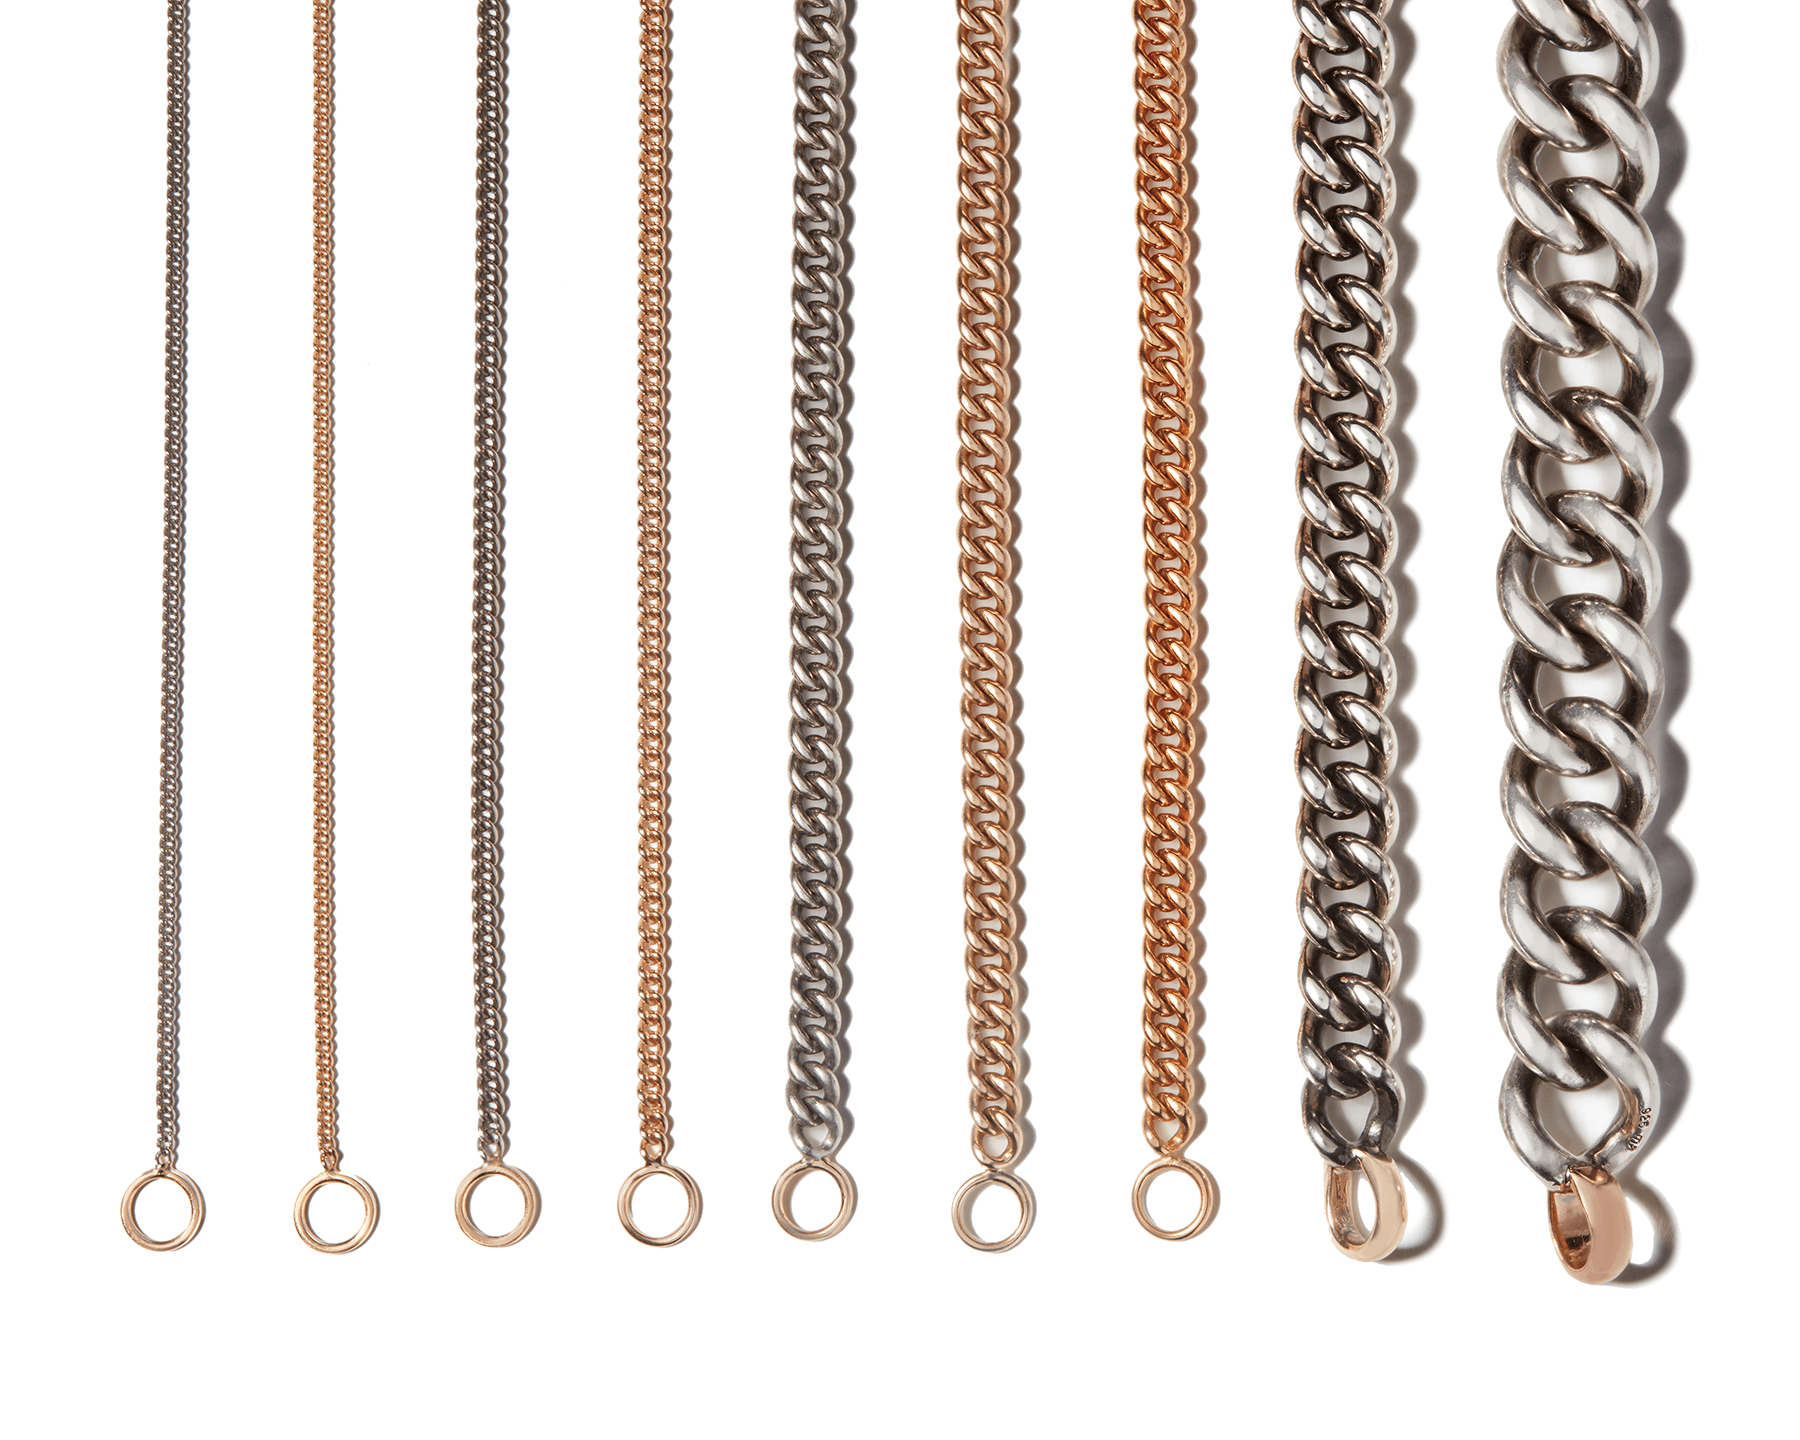 Line up of nine different chain bracelet thicknesses against white backdrop